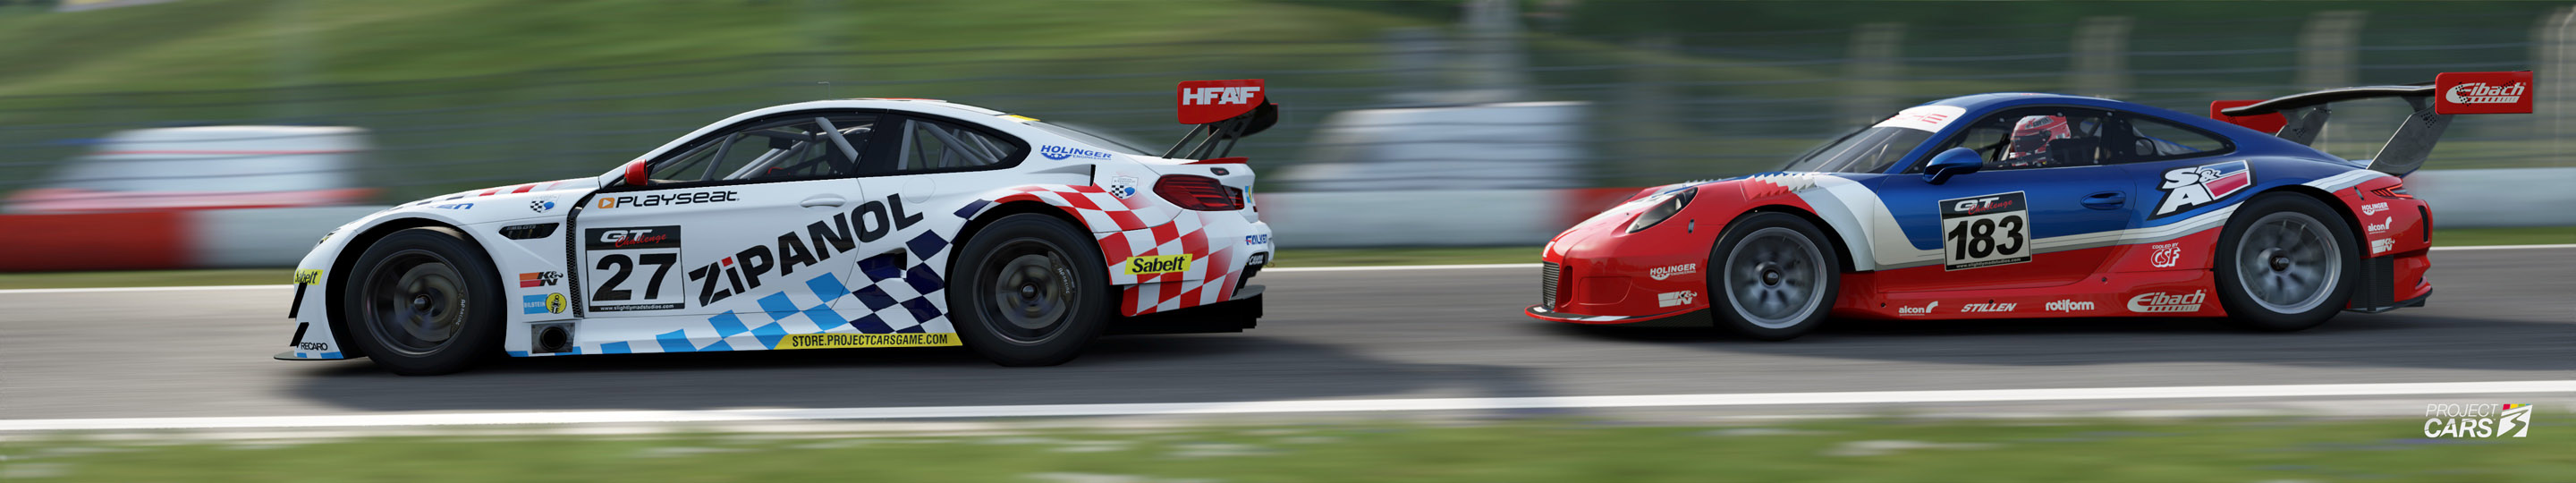 3 PROJECT CARS 3 PORSCHE 911 GT3 R at NURBURGRING copy.jpg